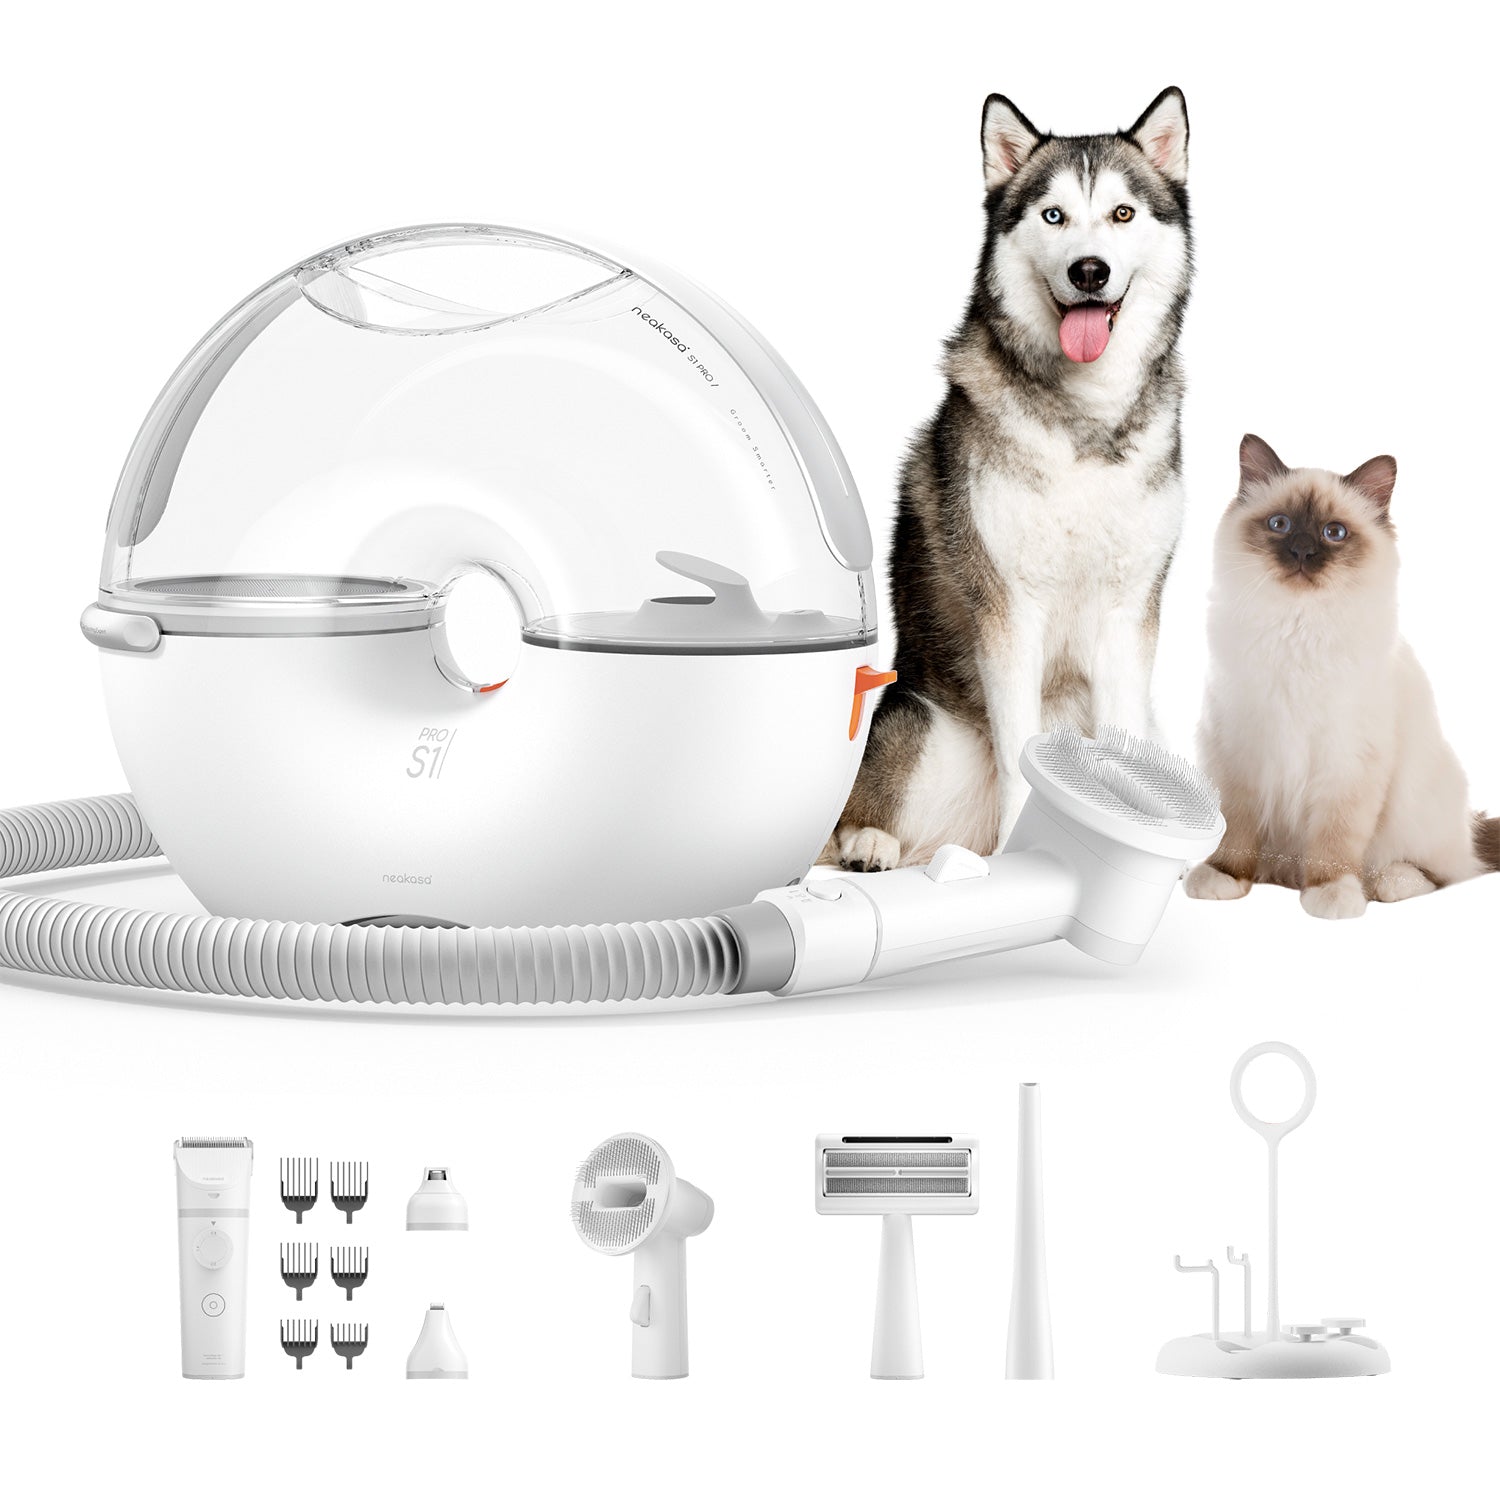 Neakasa S1 Pro 8-in-1 Pet Grooming Vacuum for Dogs Cats